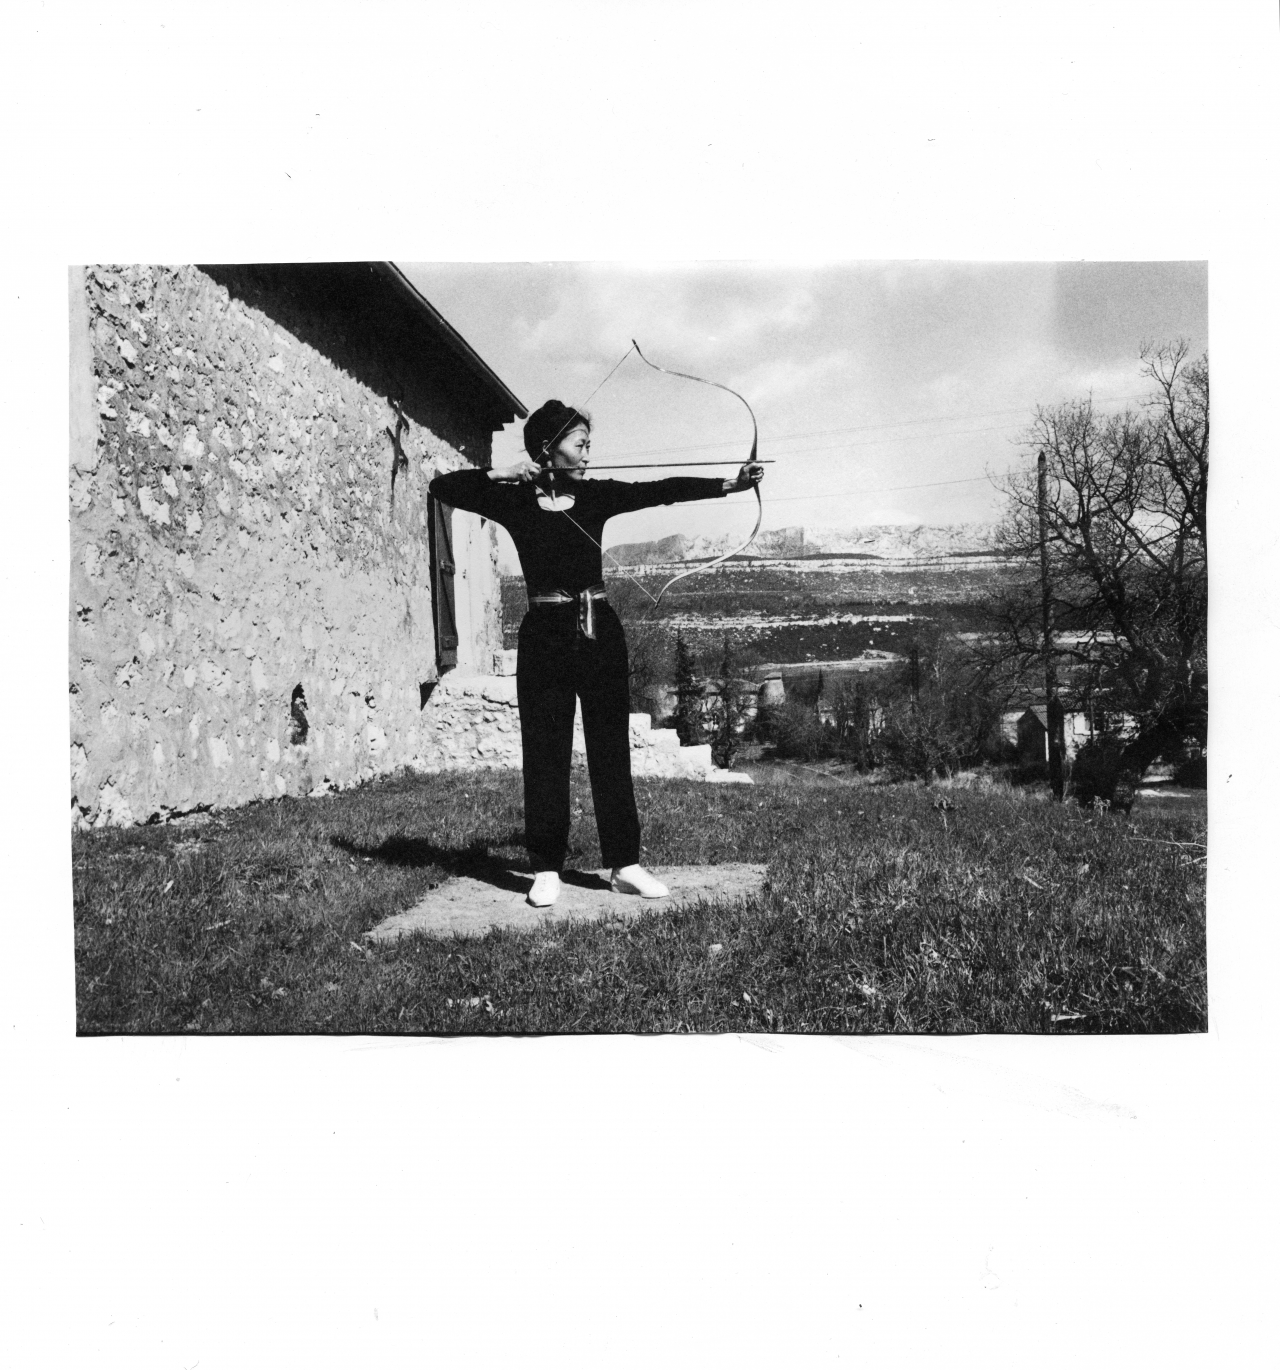 Soun-Gui Kim with Bow and Arrow, black and white